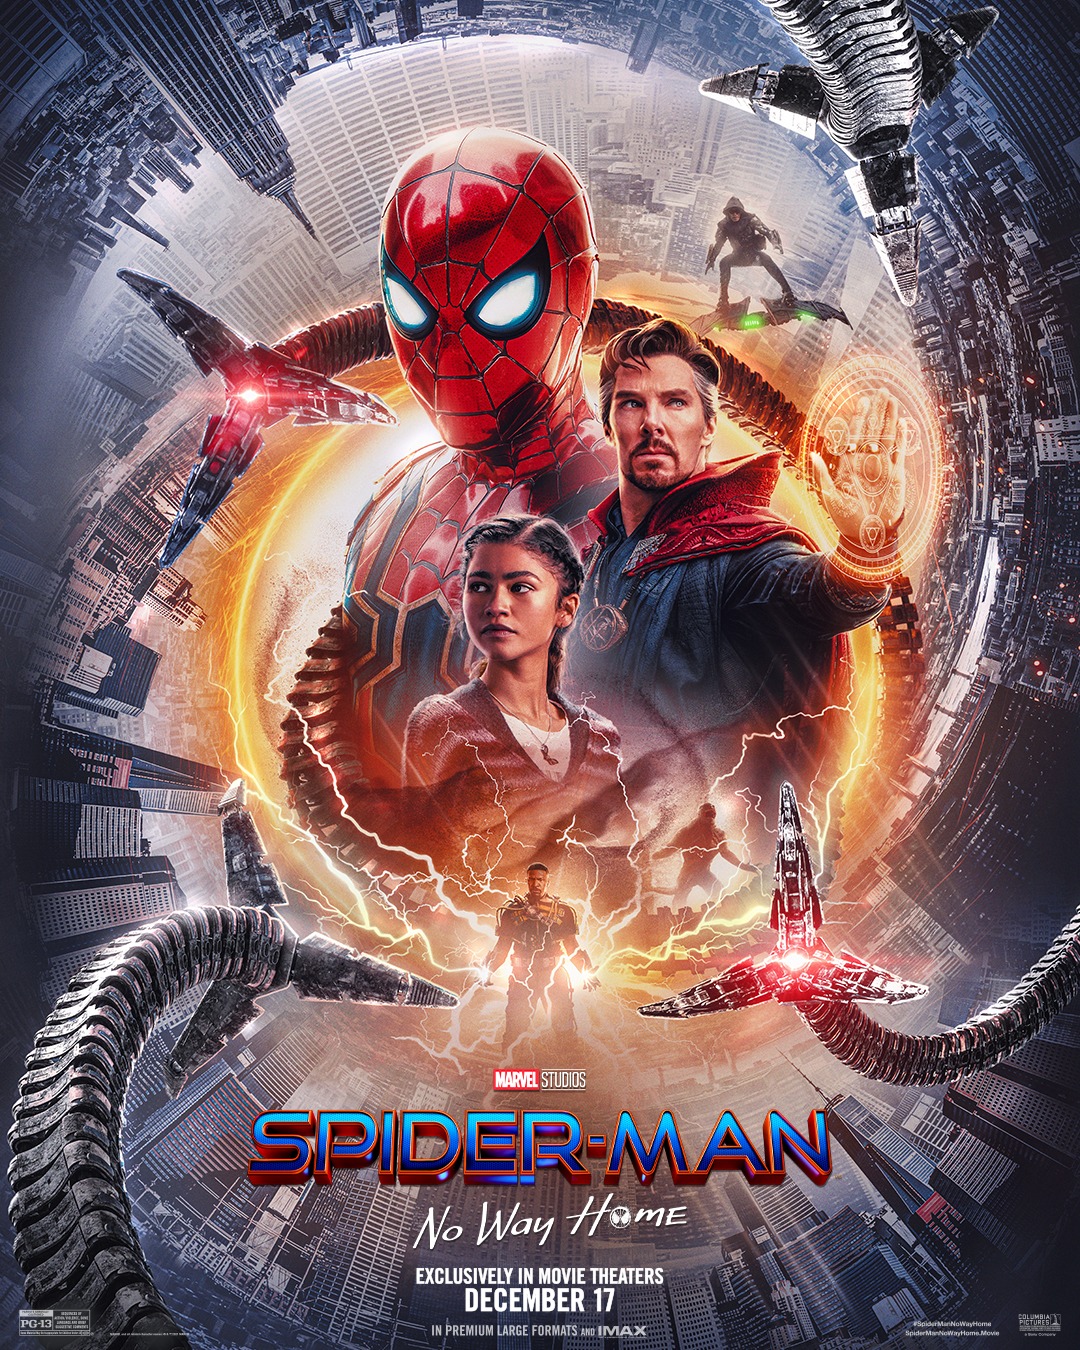 Petition · Make The Amazing Spider-Man 3 directed by Marc Webb and